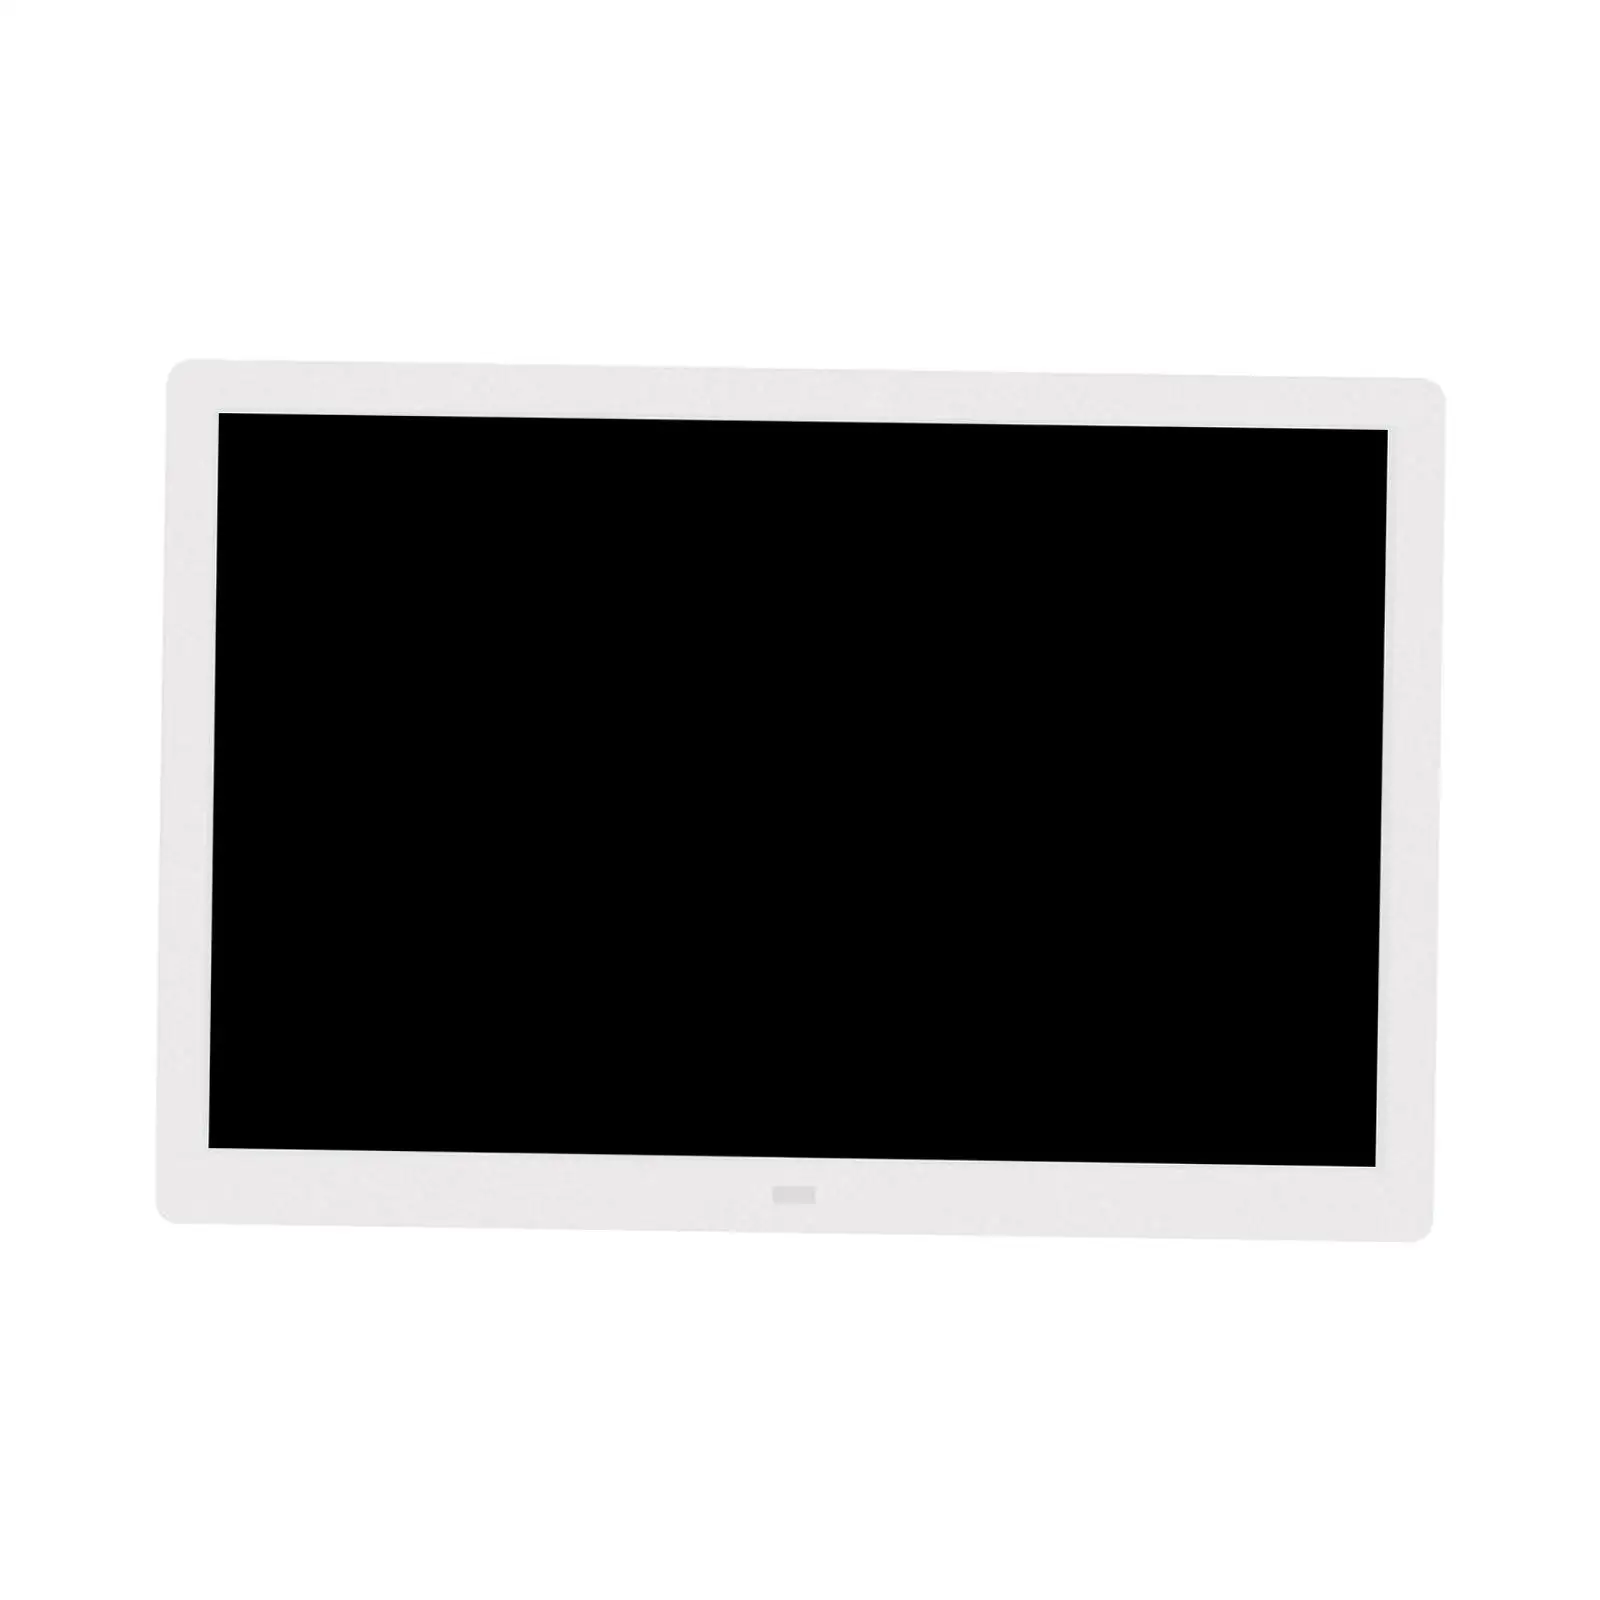 12 Inches Electronic Digital Photo Frame White US Standard Plug 16/10 Screen for Wall